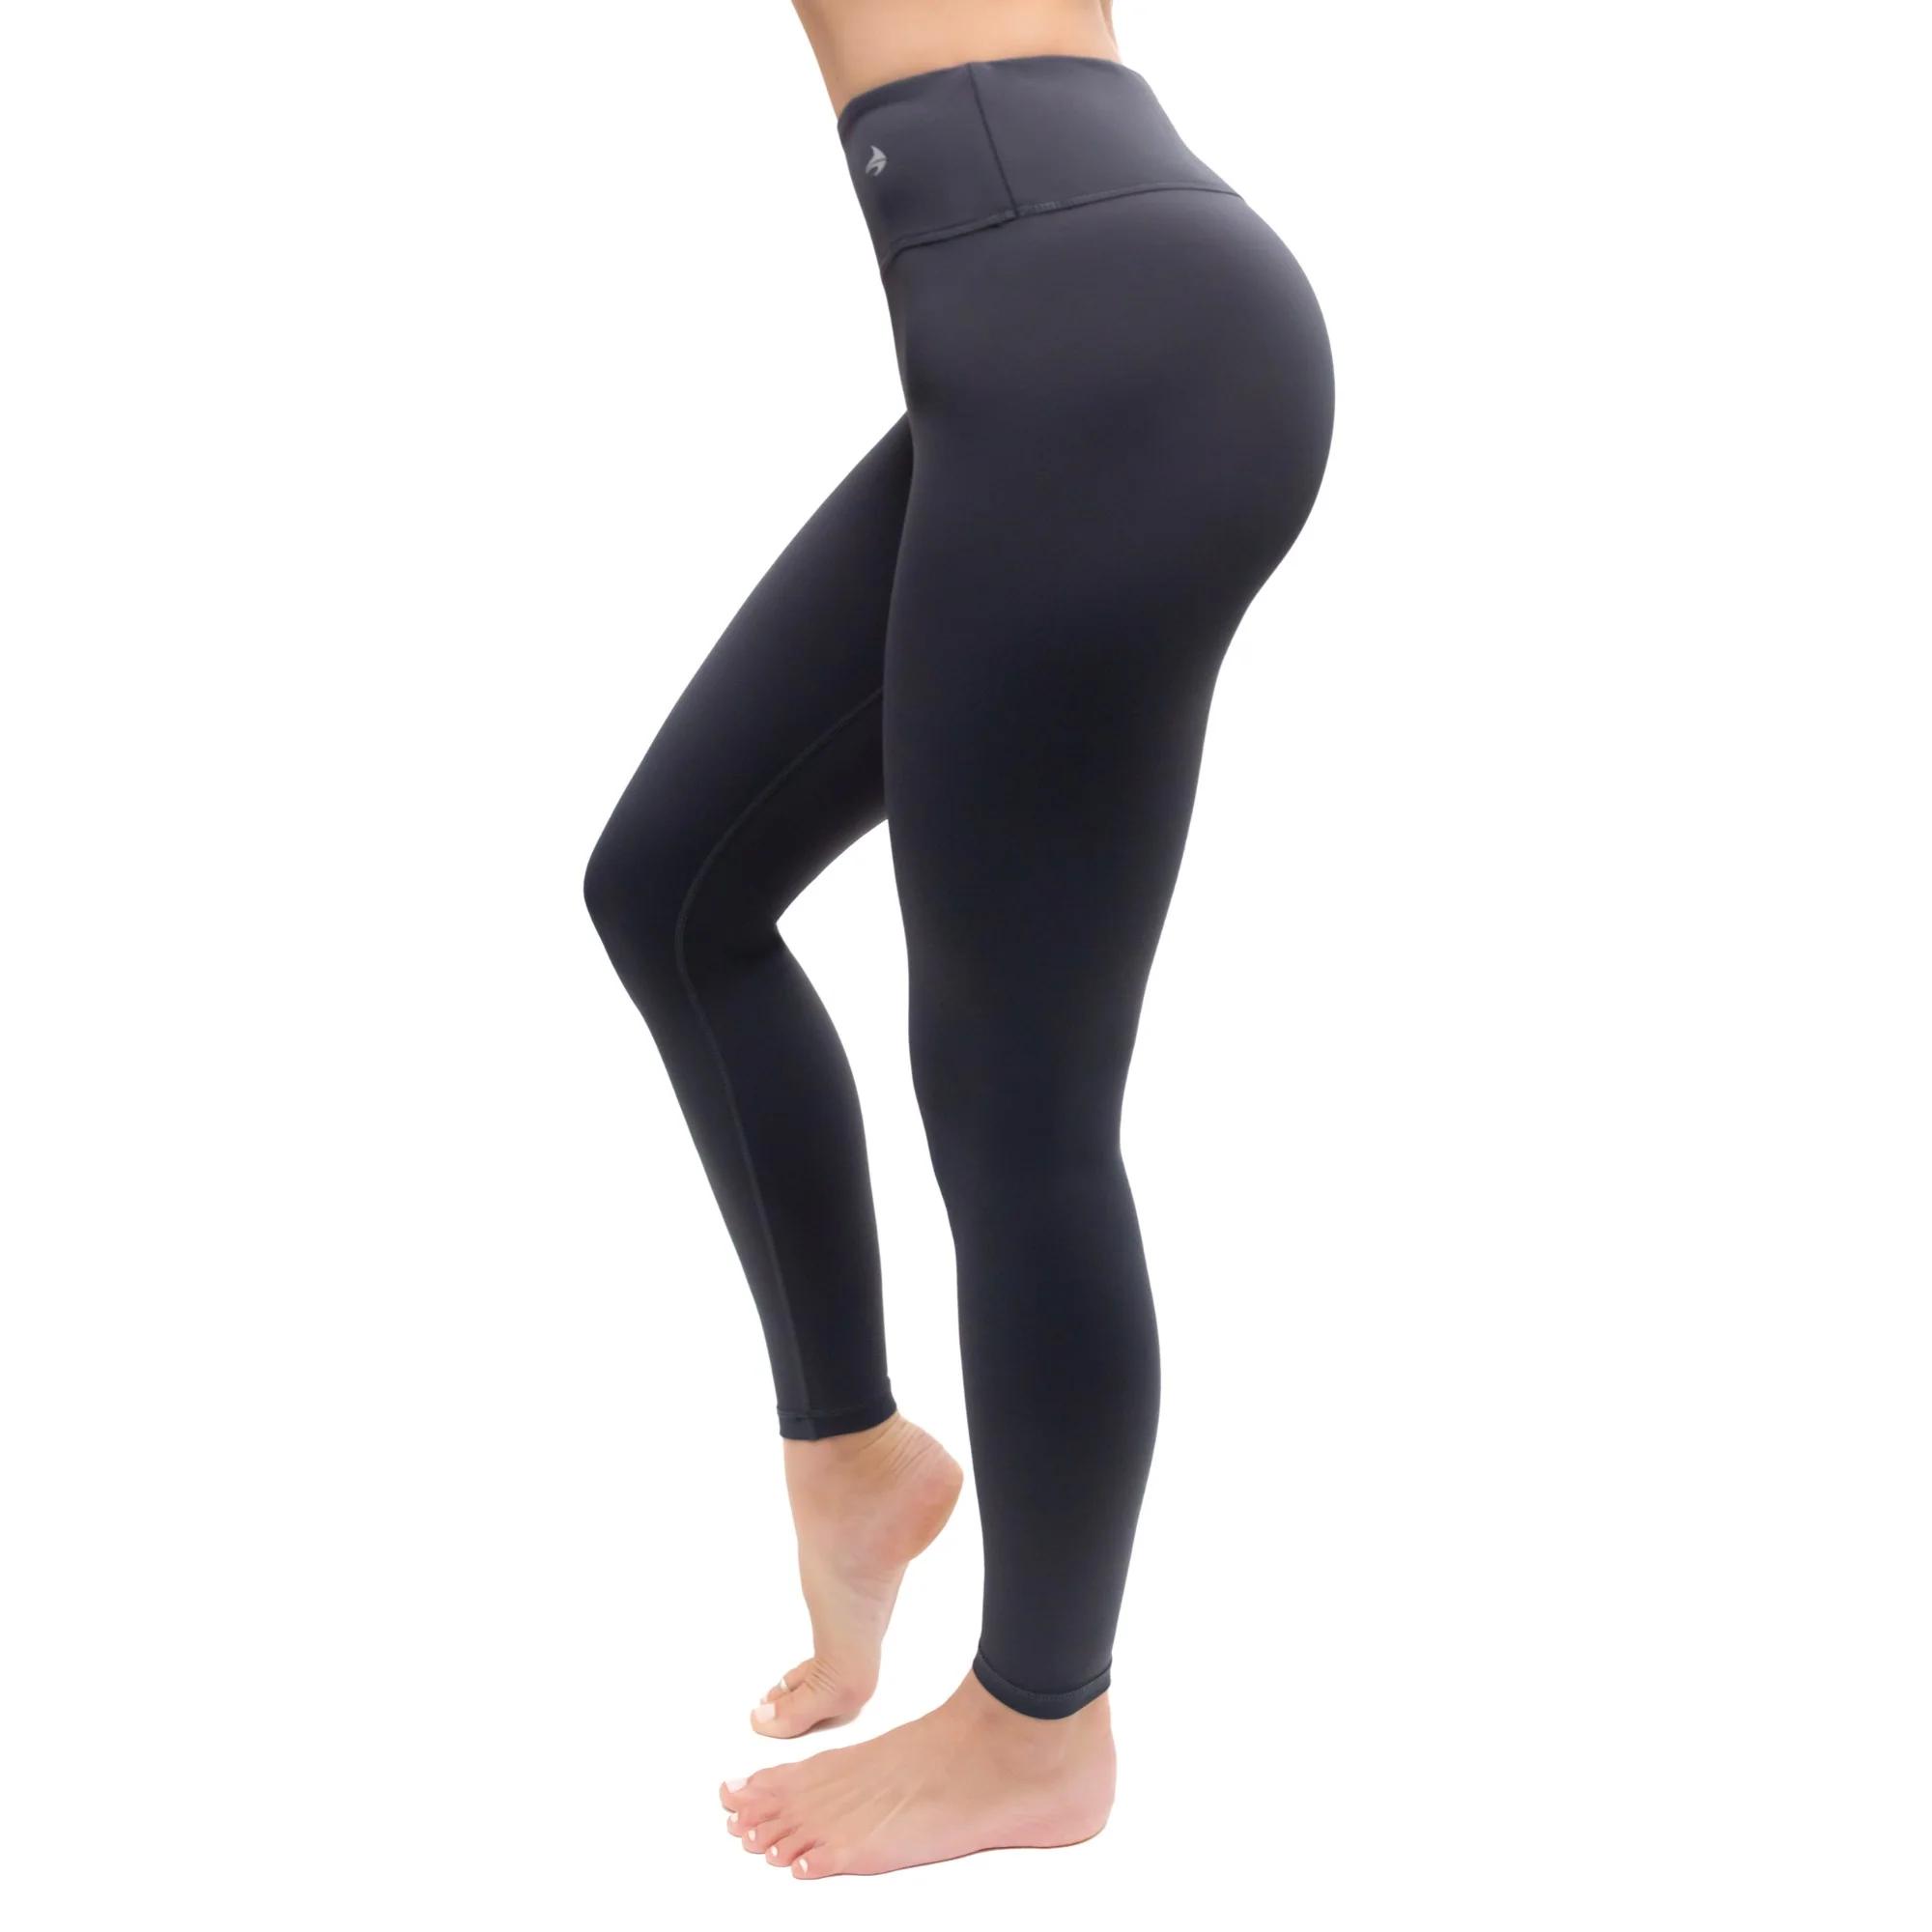 compression yoga pants - What does wearing compression leggings do